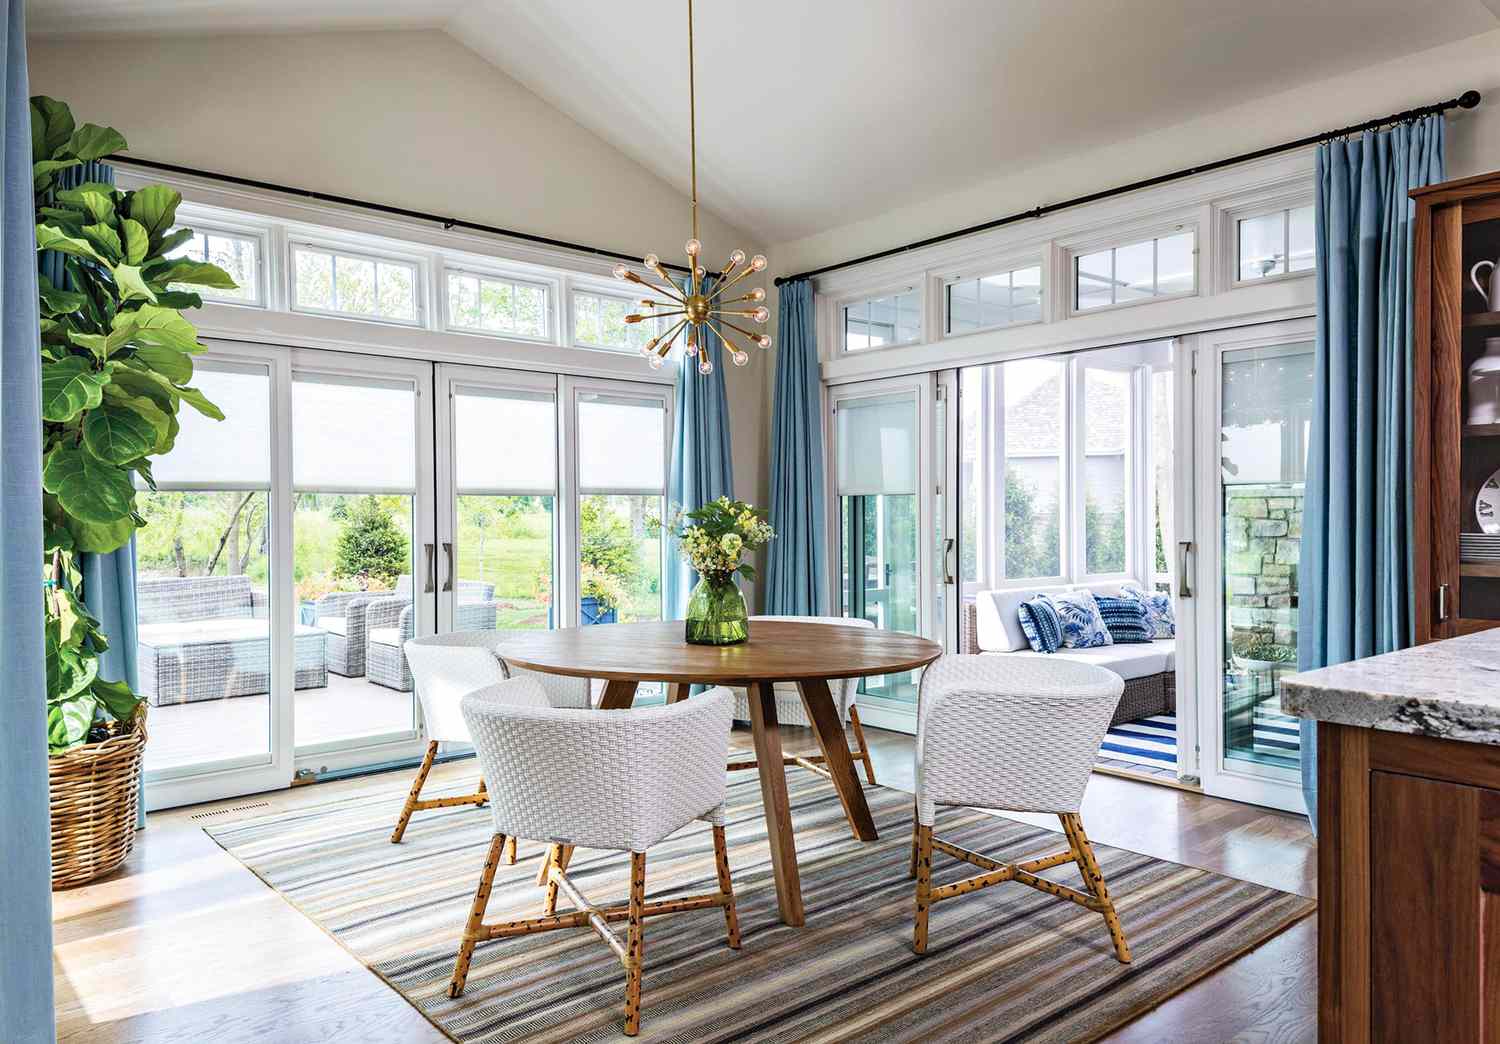 13 Stylish Window Treatment Ideas For, What Curtains For Patio Doors